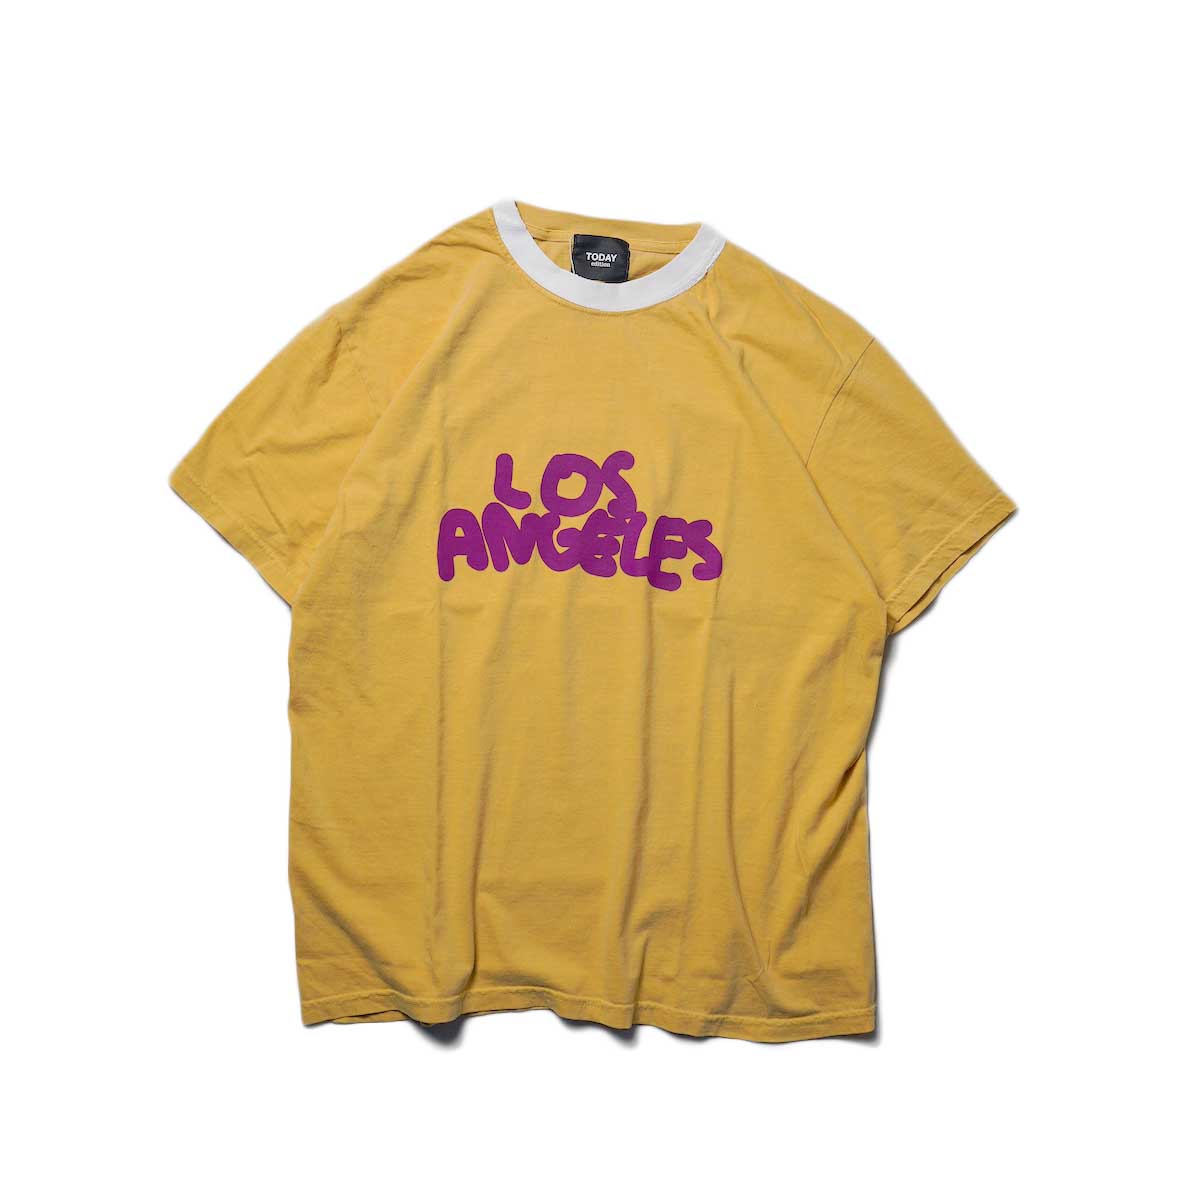 TODAY edition / Printed Ringer "Los angels" SS Tee